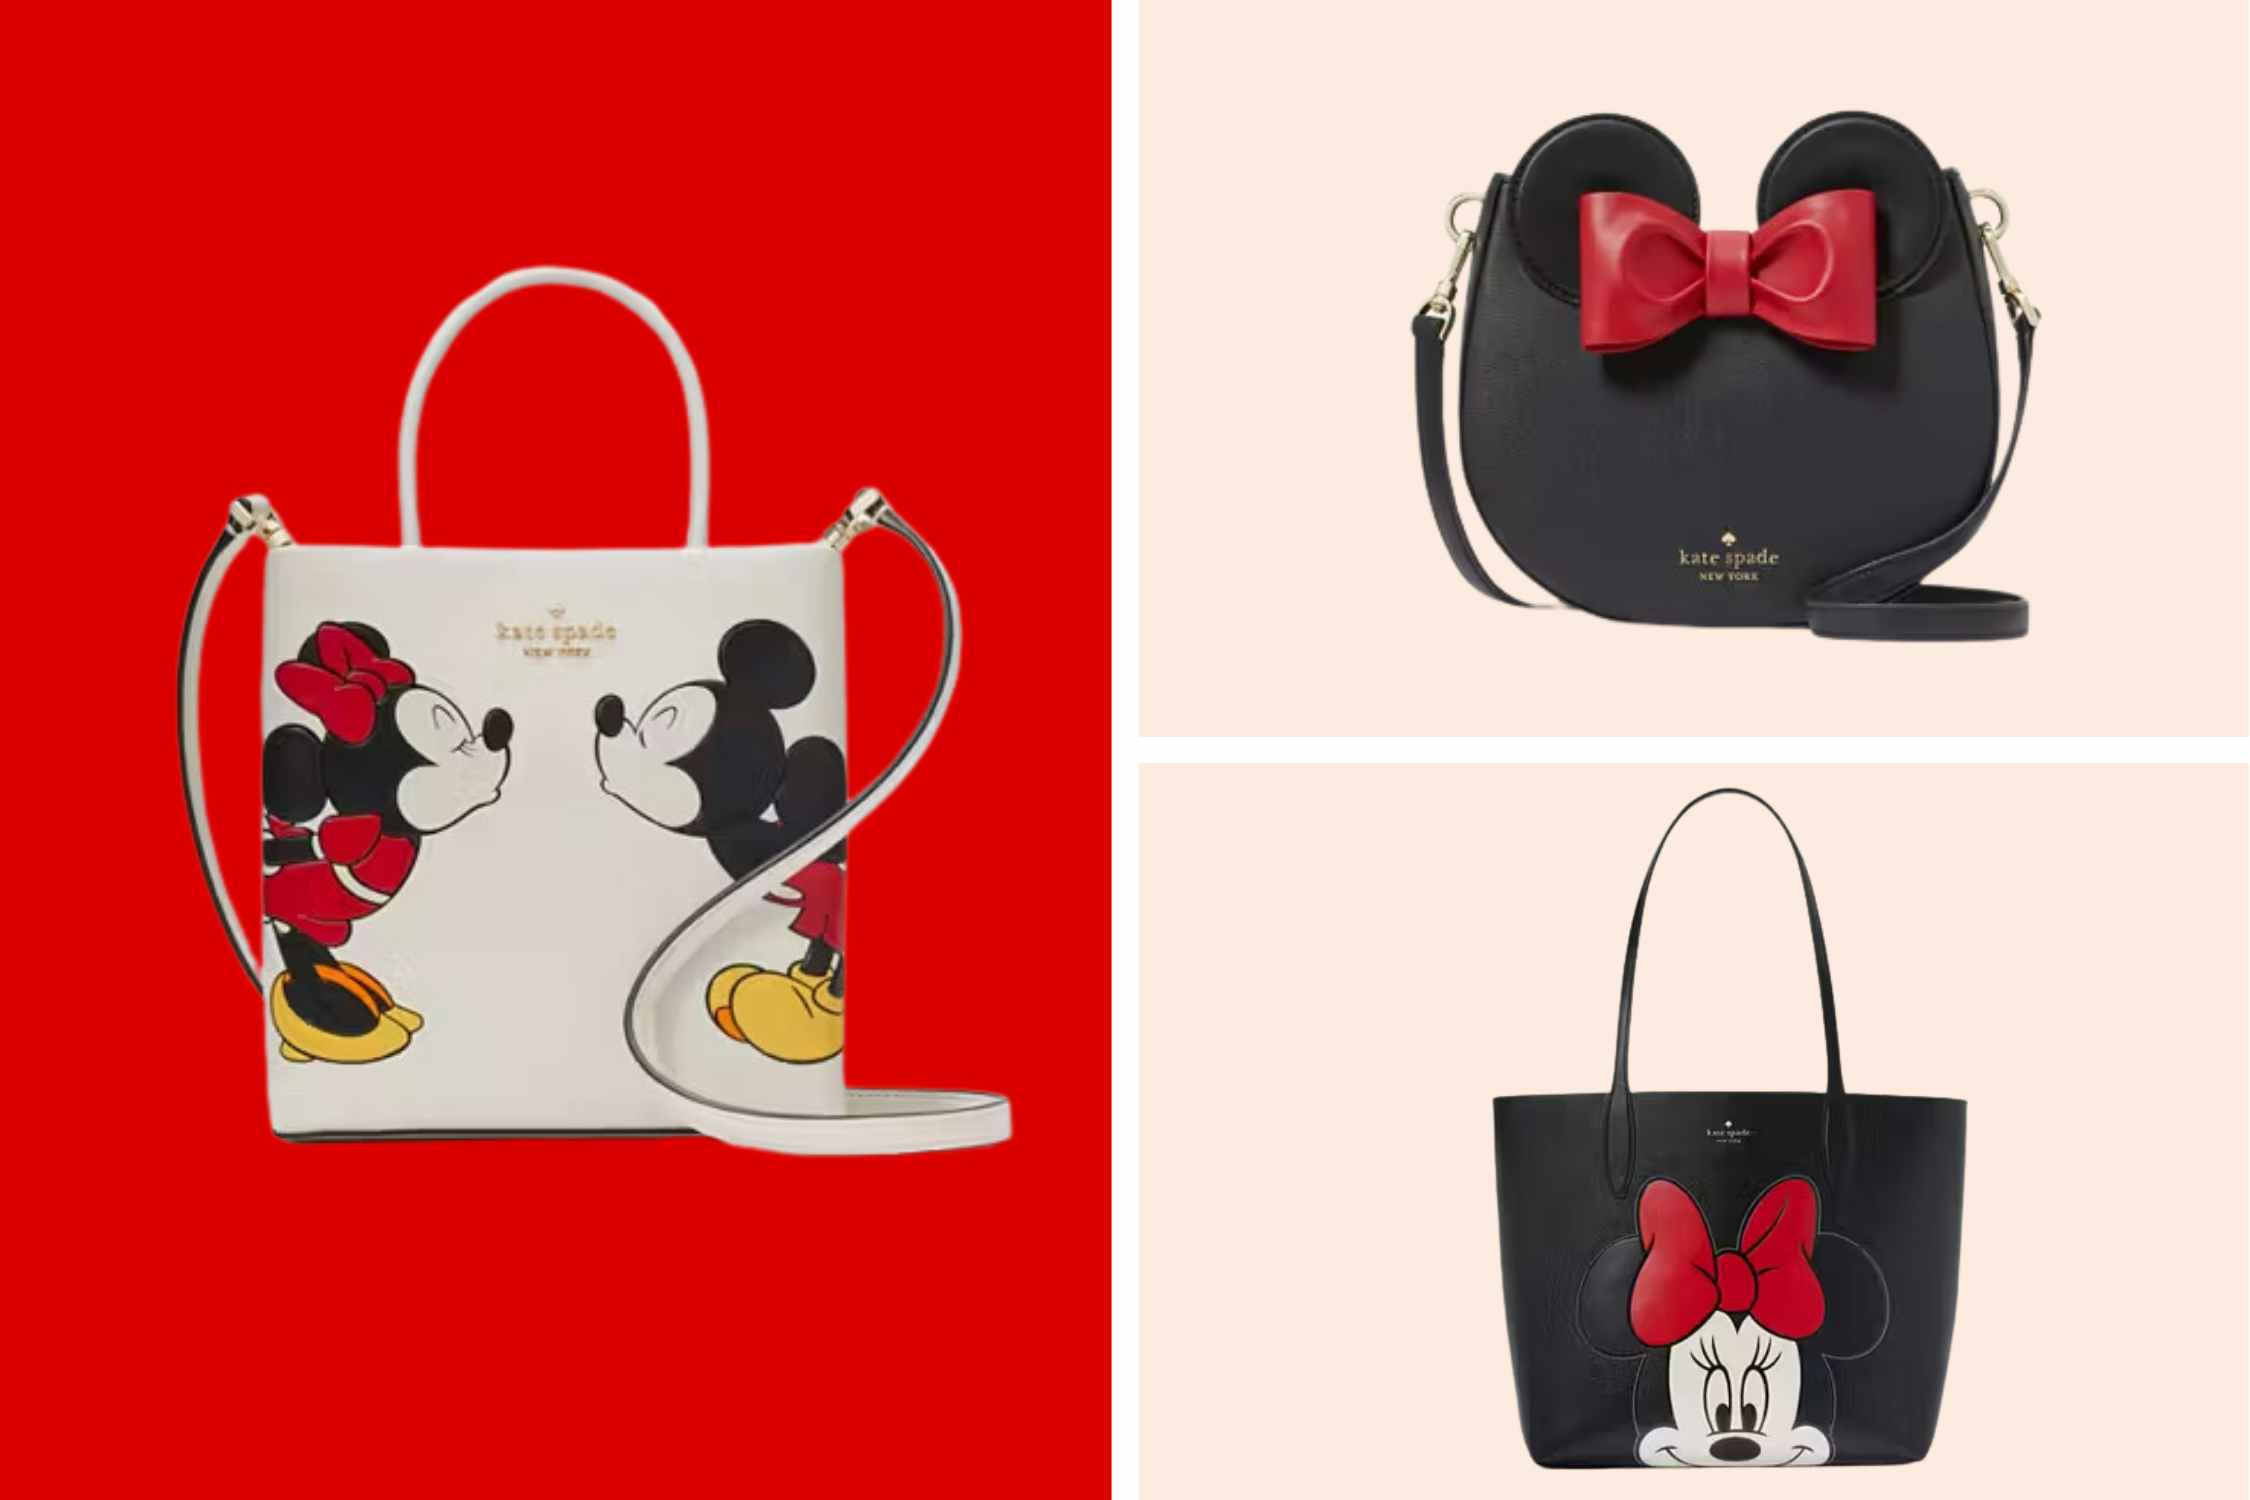 Disney Minnie Mouse Bags, as Low as $103 at Kate Spade Outlet